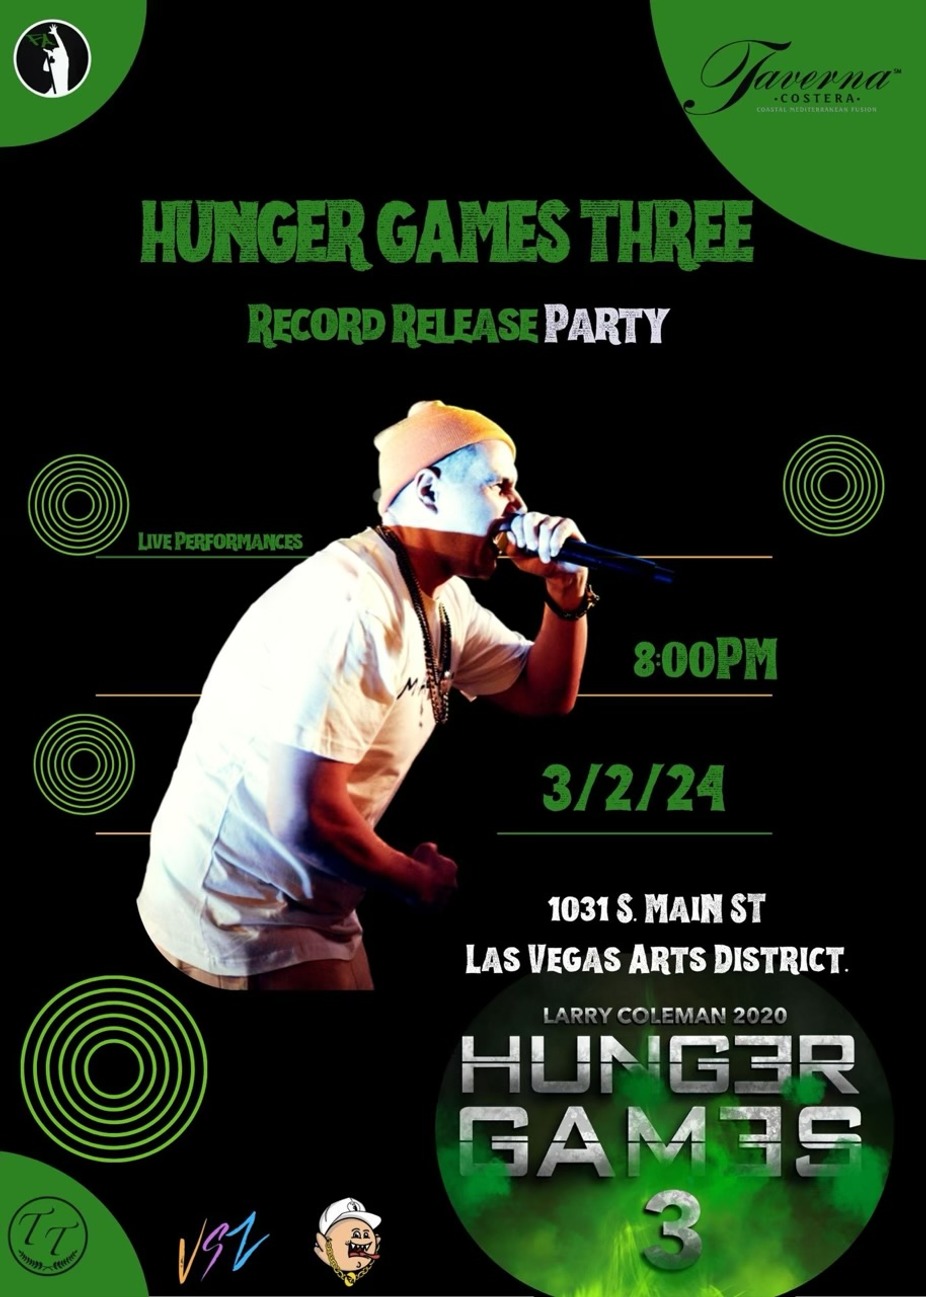 Hunger Games event photo